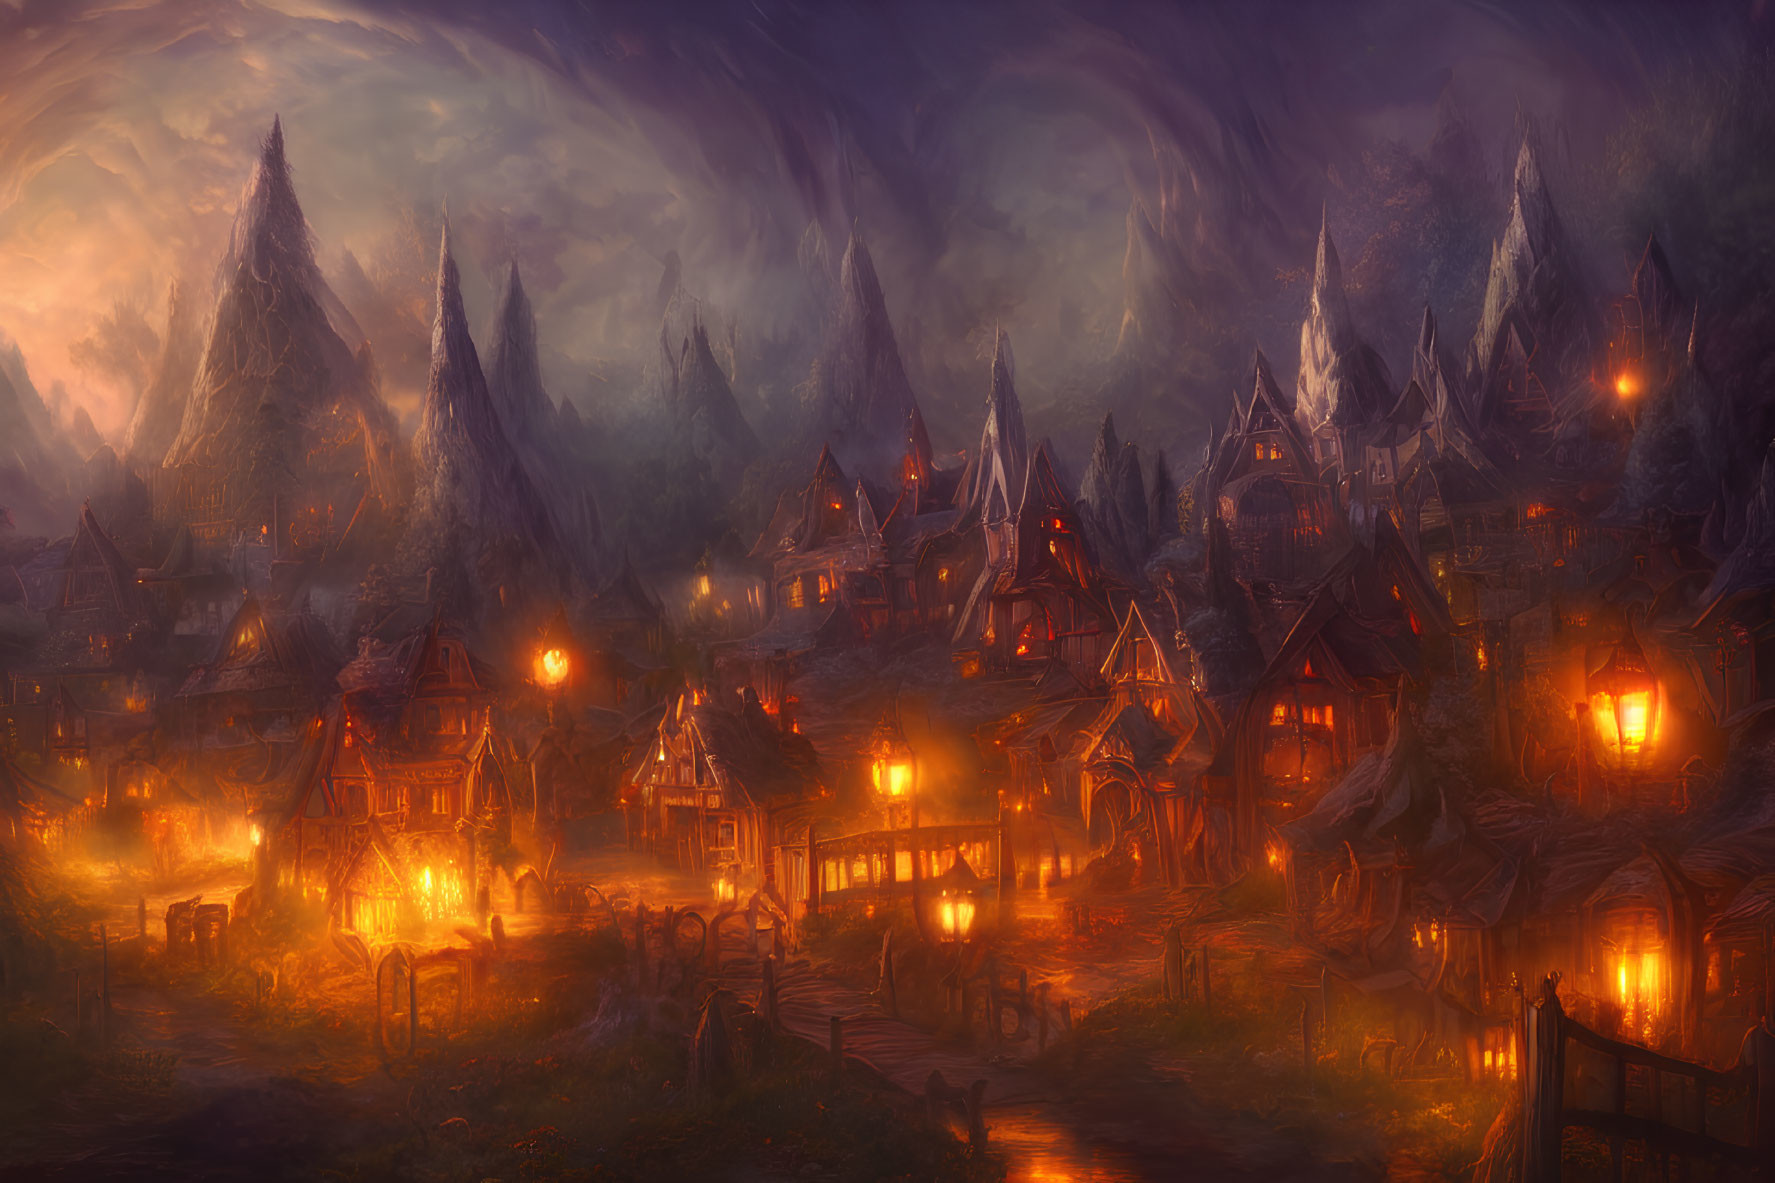 Enchanting village scene at dusk with glowing lights and twilight sky